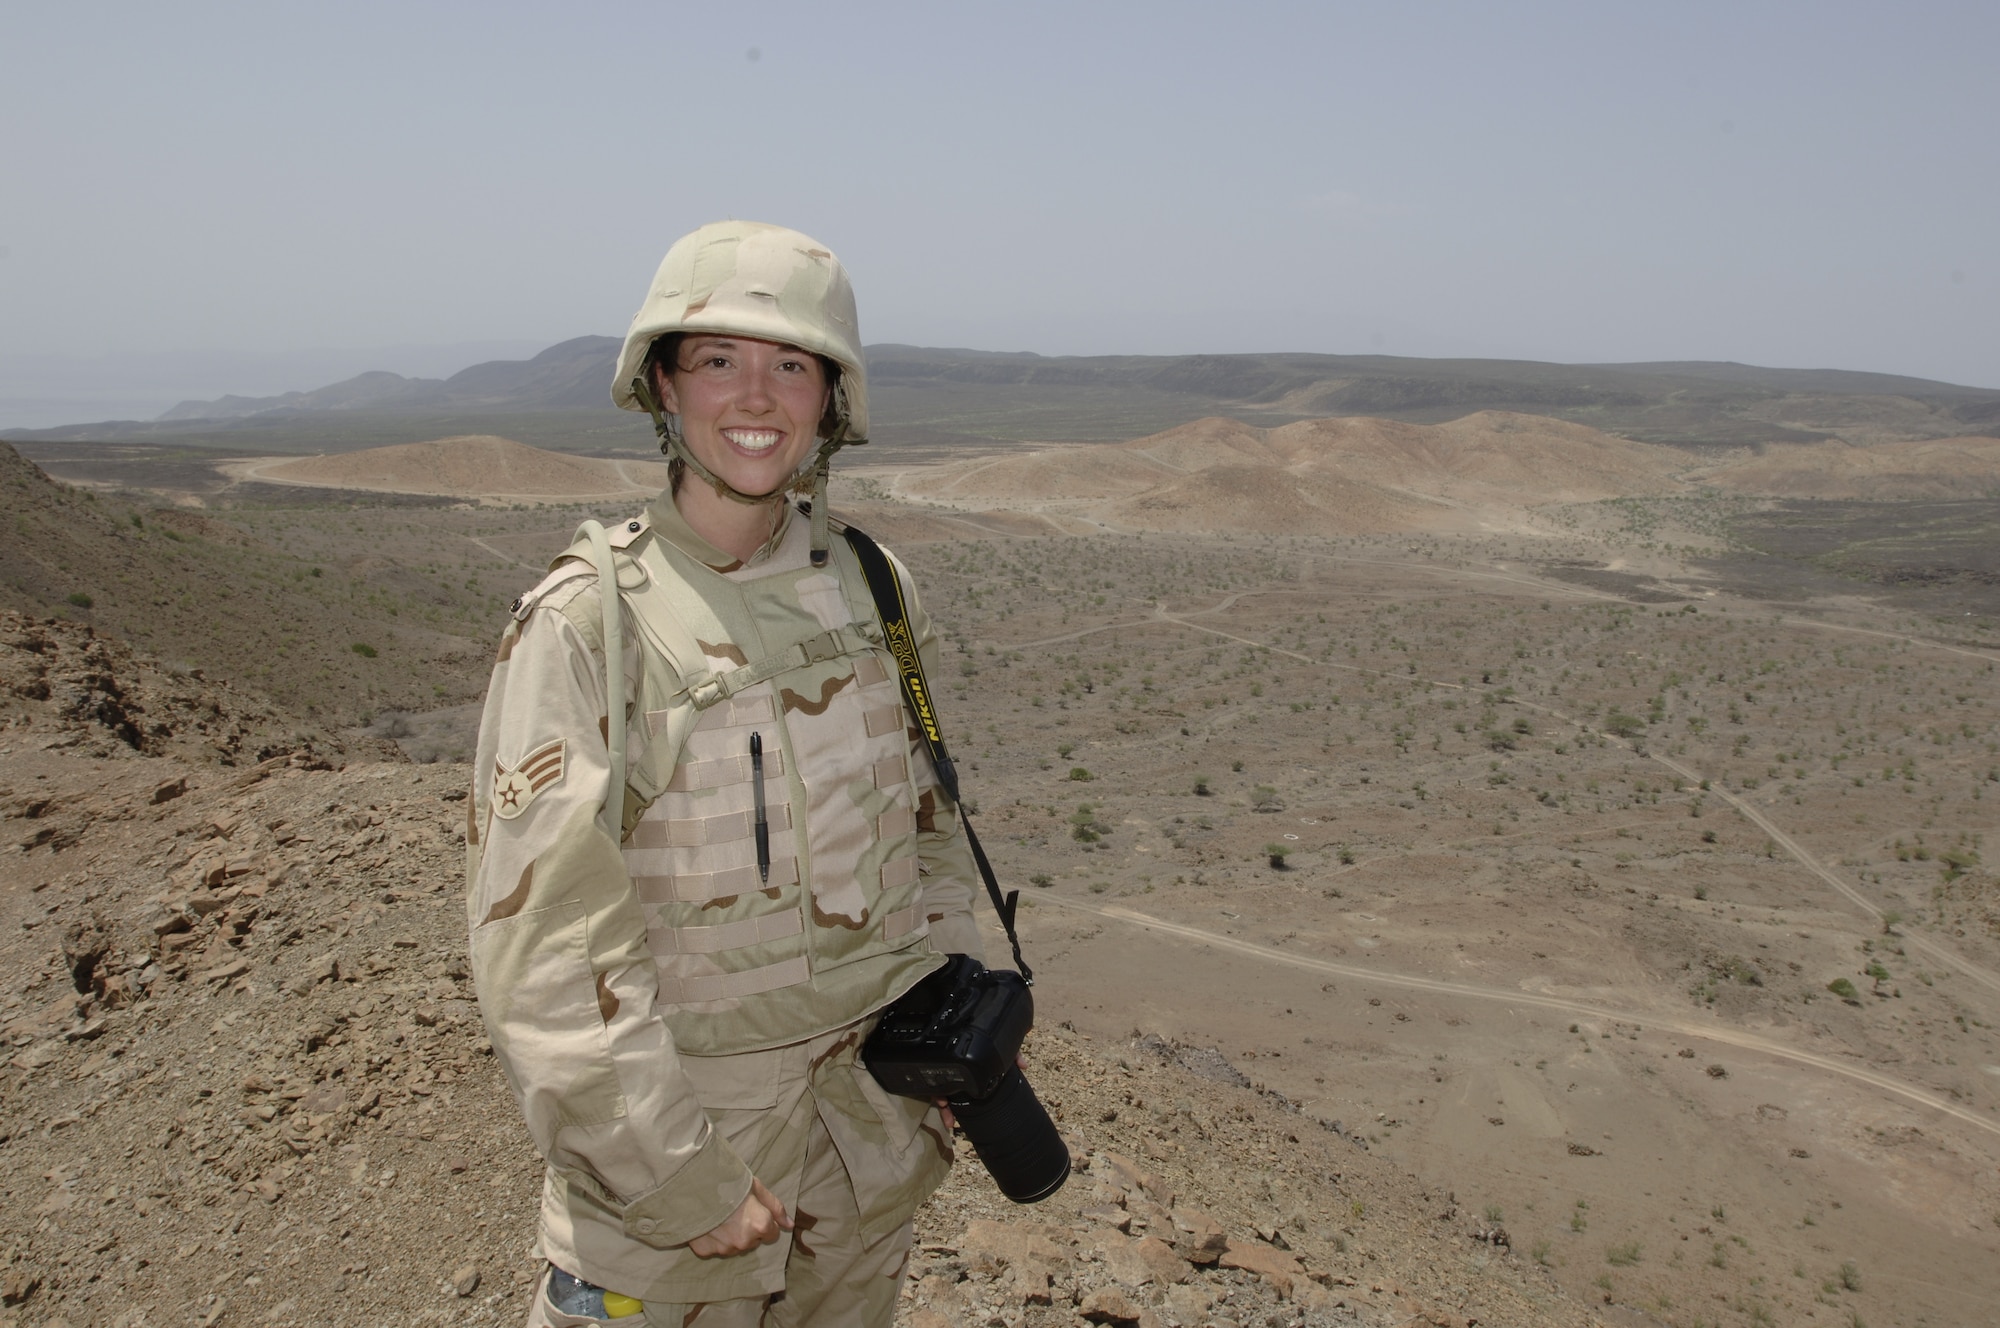 Senior Airman Jamie Baker served as a photographer assigned to the Combined Joint Task Force Horn of Africa at Camp Lemonnier, Djibouti in 2007. She supported operations Iraqi Freedom and Enduring Freedom during her six-year enlistment. (U.S. Air Force photo by Staff Sgt. Daniel Ashley)